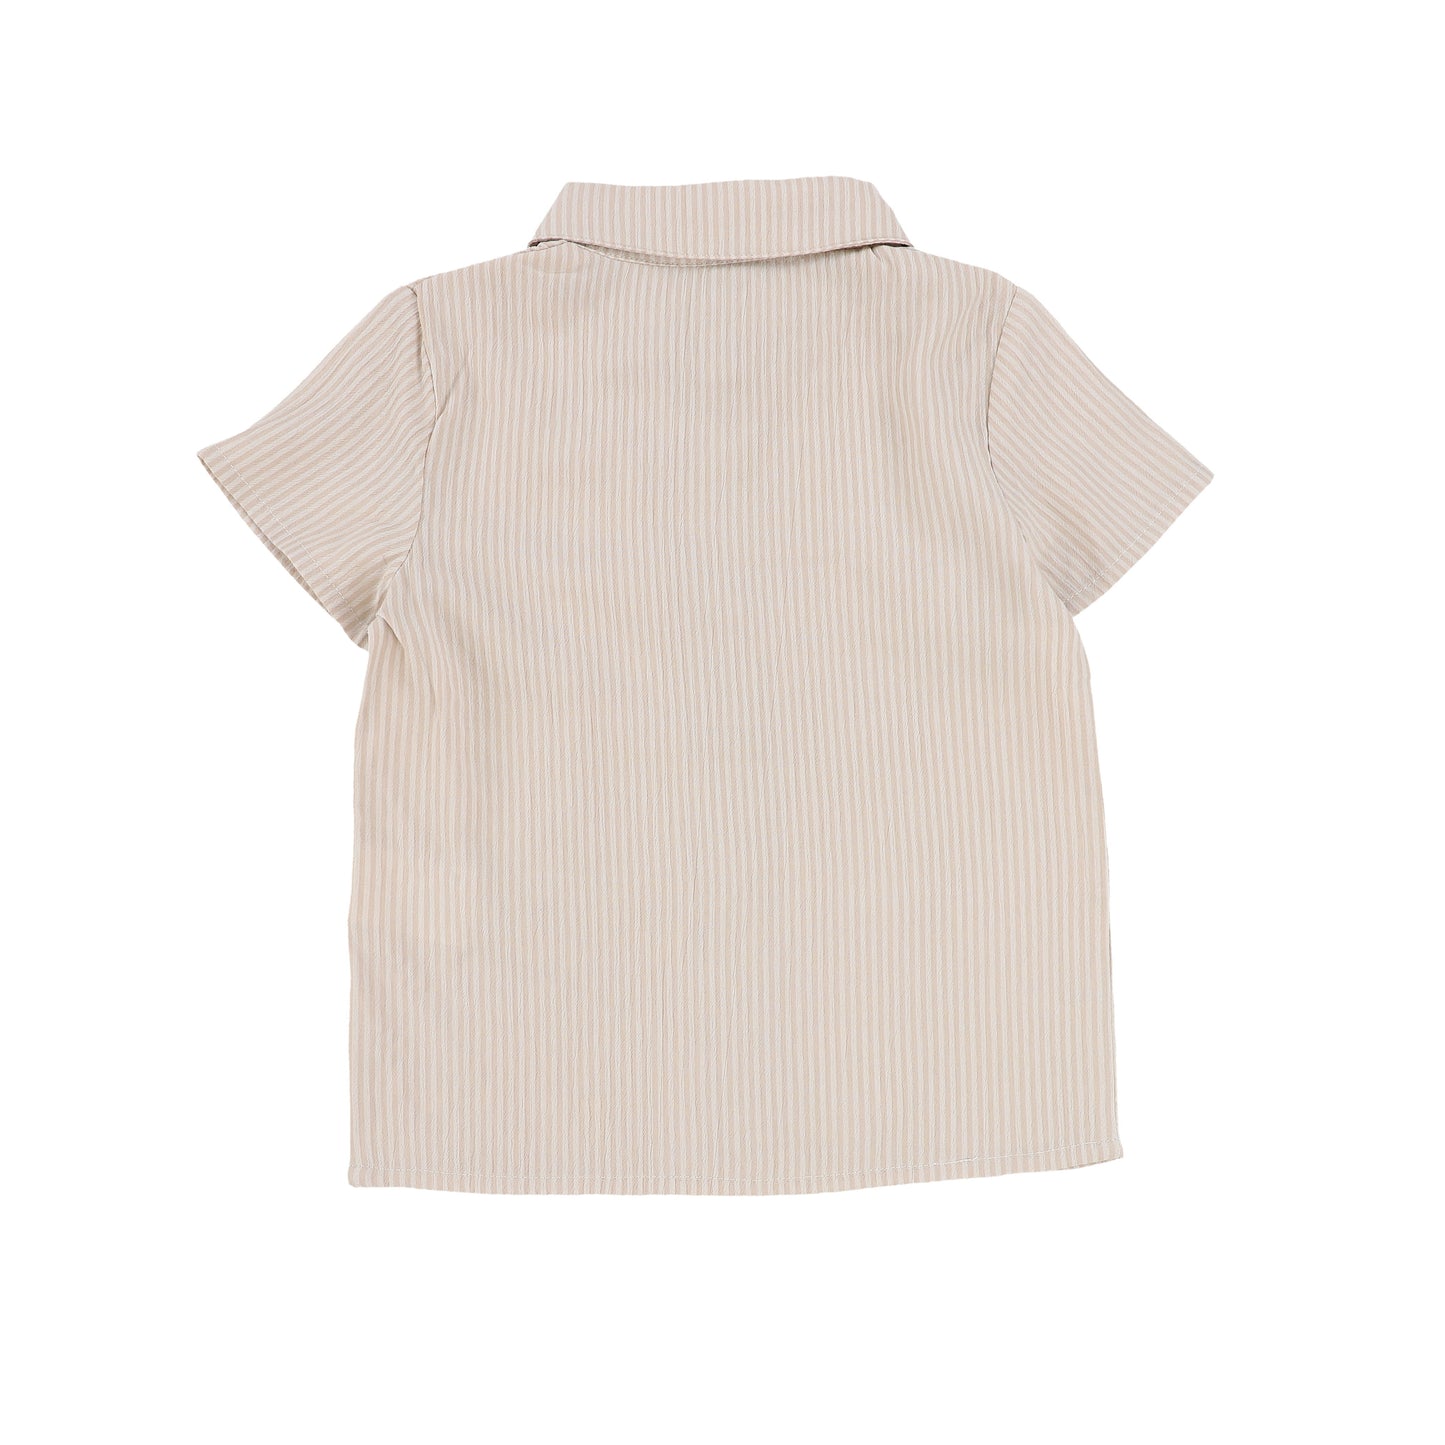 ONE CHILD TAN AND WHITE STRIPED BLOUSE [Final Sale]